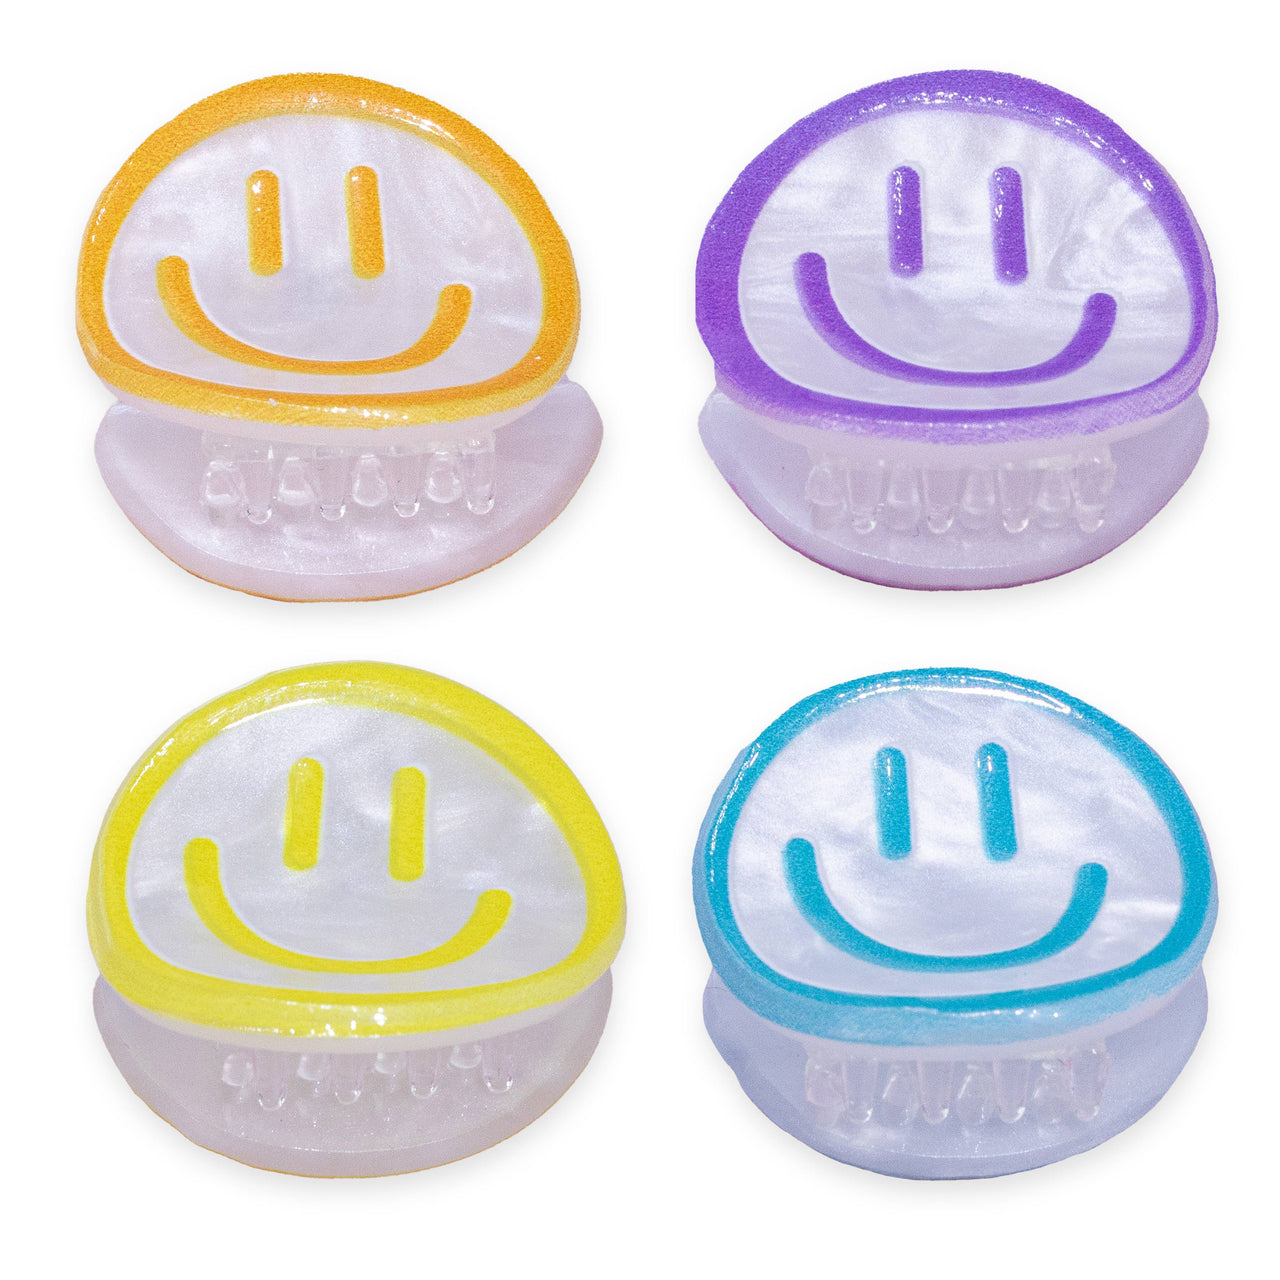 4 pack of 4 small smiley face hair clips